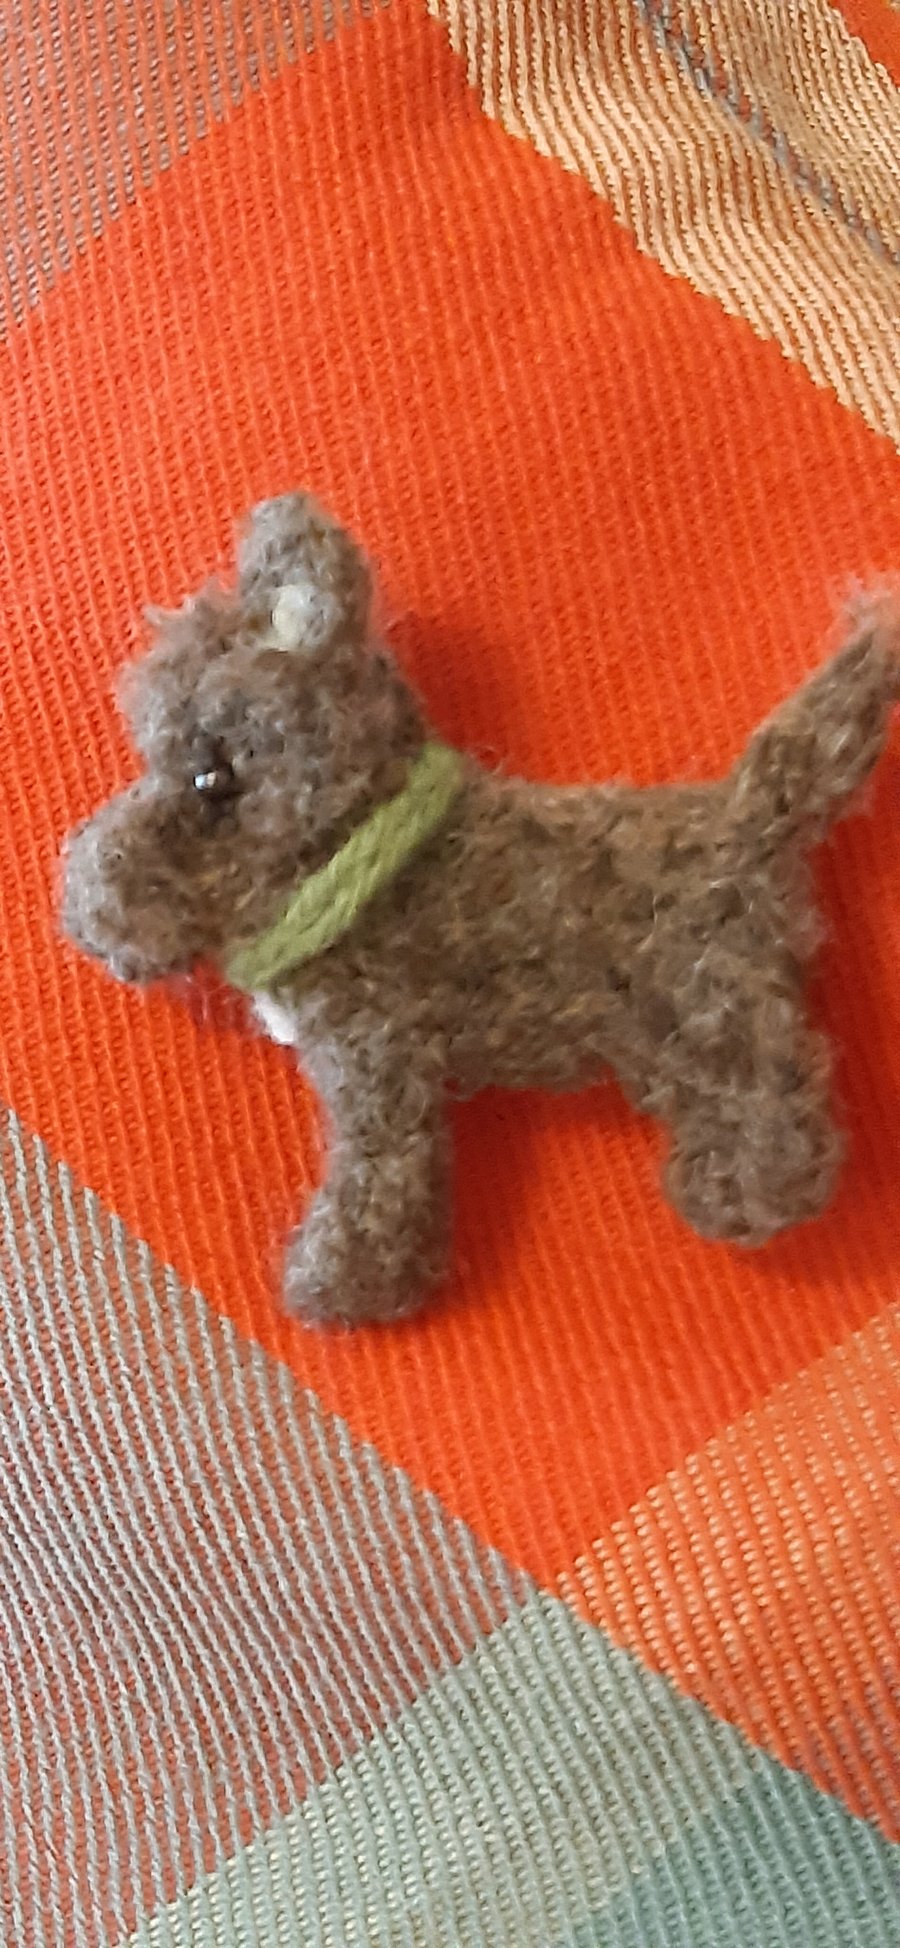 Chocolate coloured terrier Dog brooch small and cute